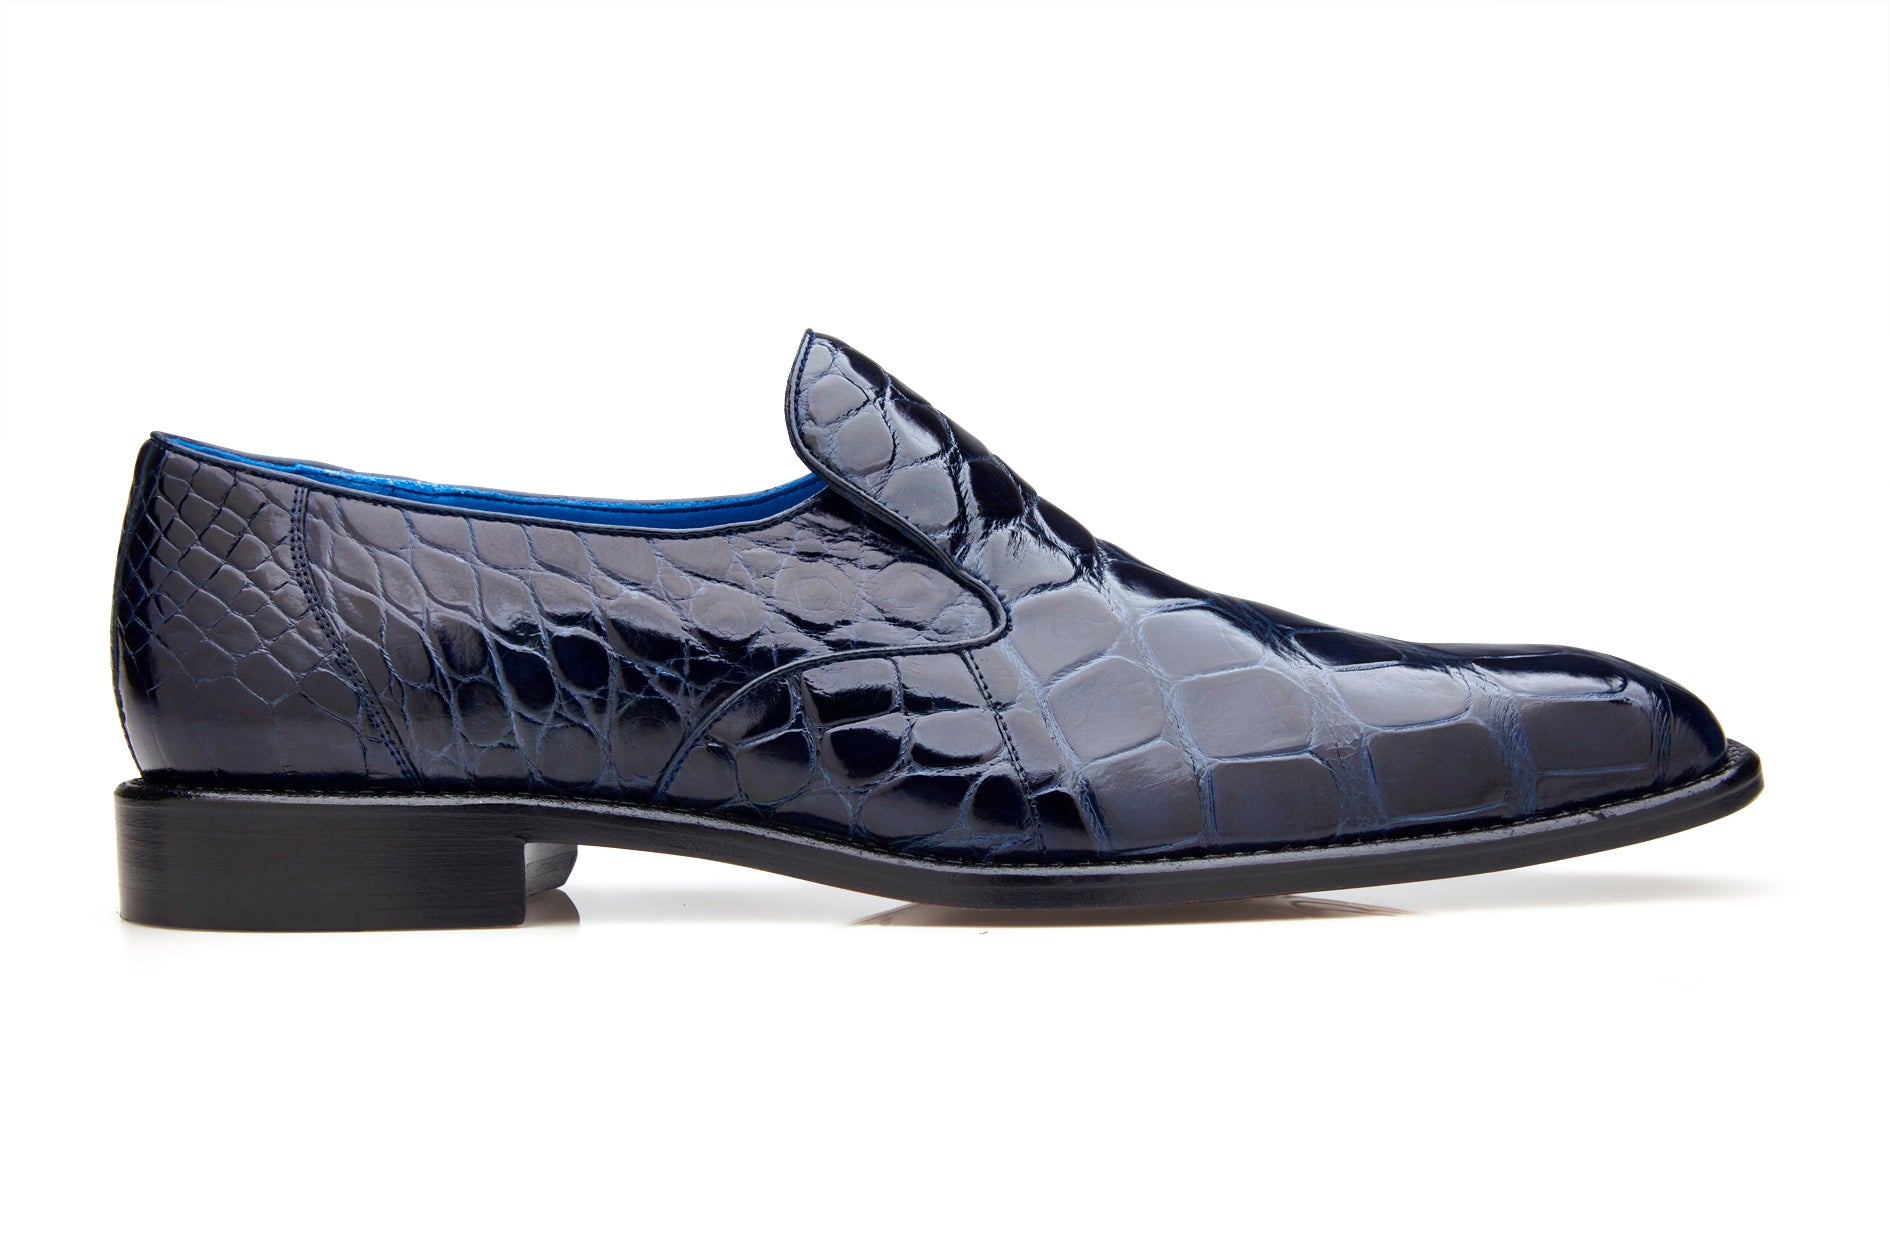 Men's Alligator Dress Shoes, Exotic Leather | The Lago by Belvedere Shoes